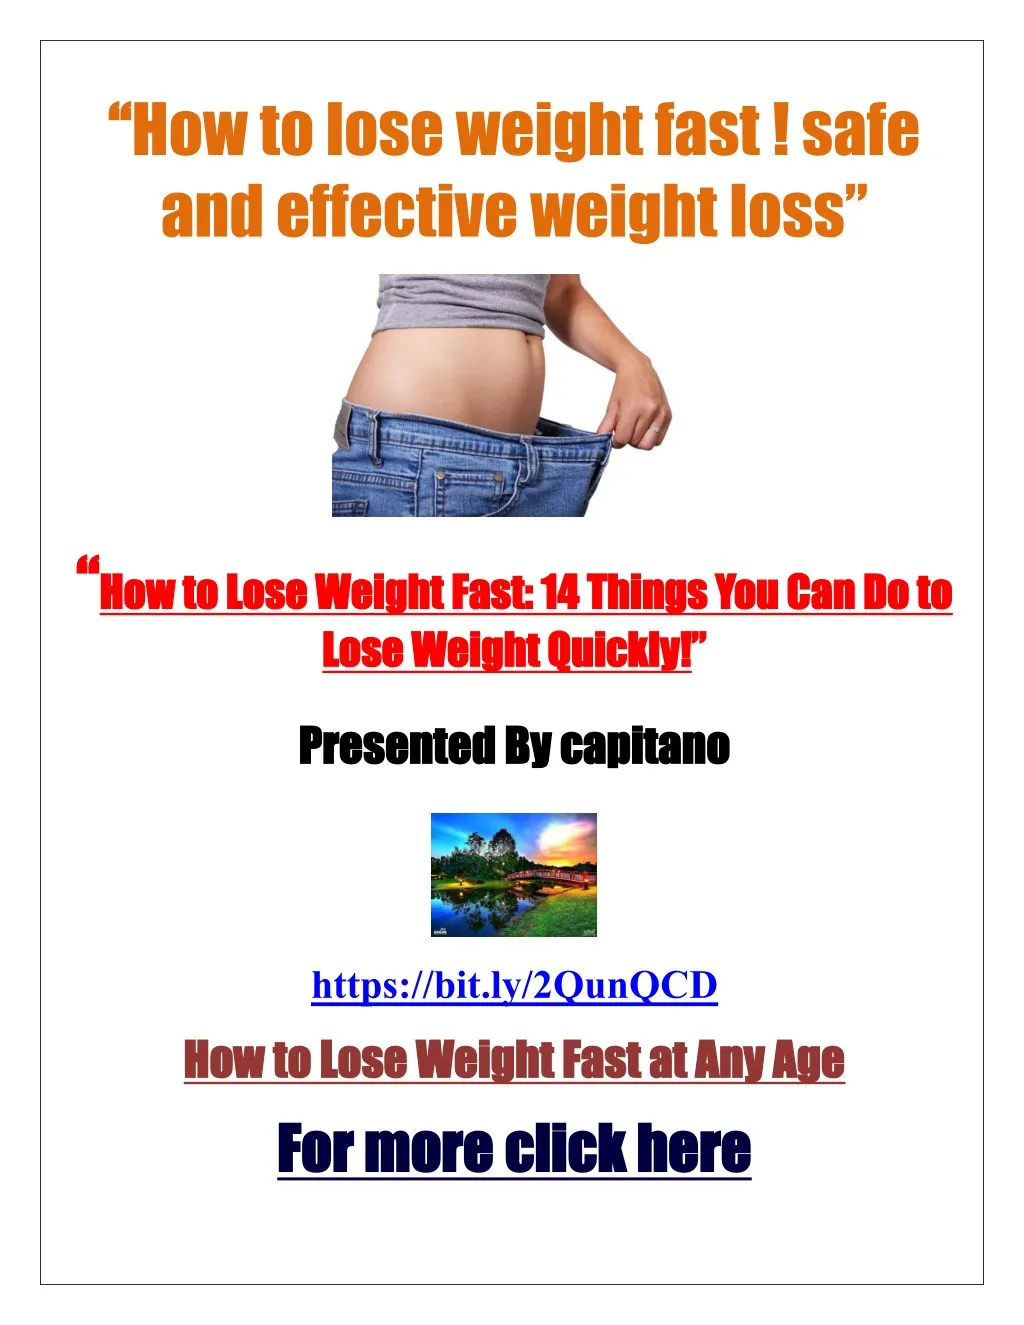 how to lose weight fast safe and effective weight n.